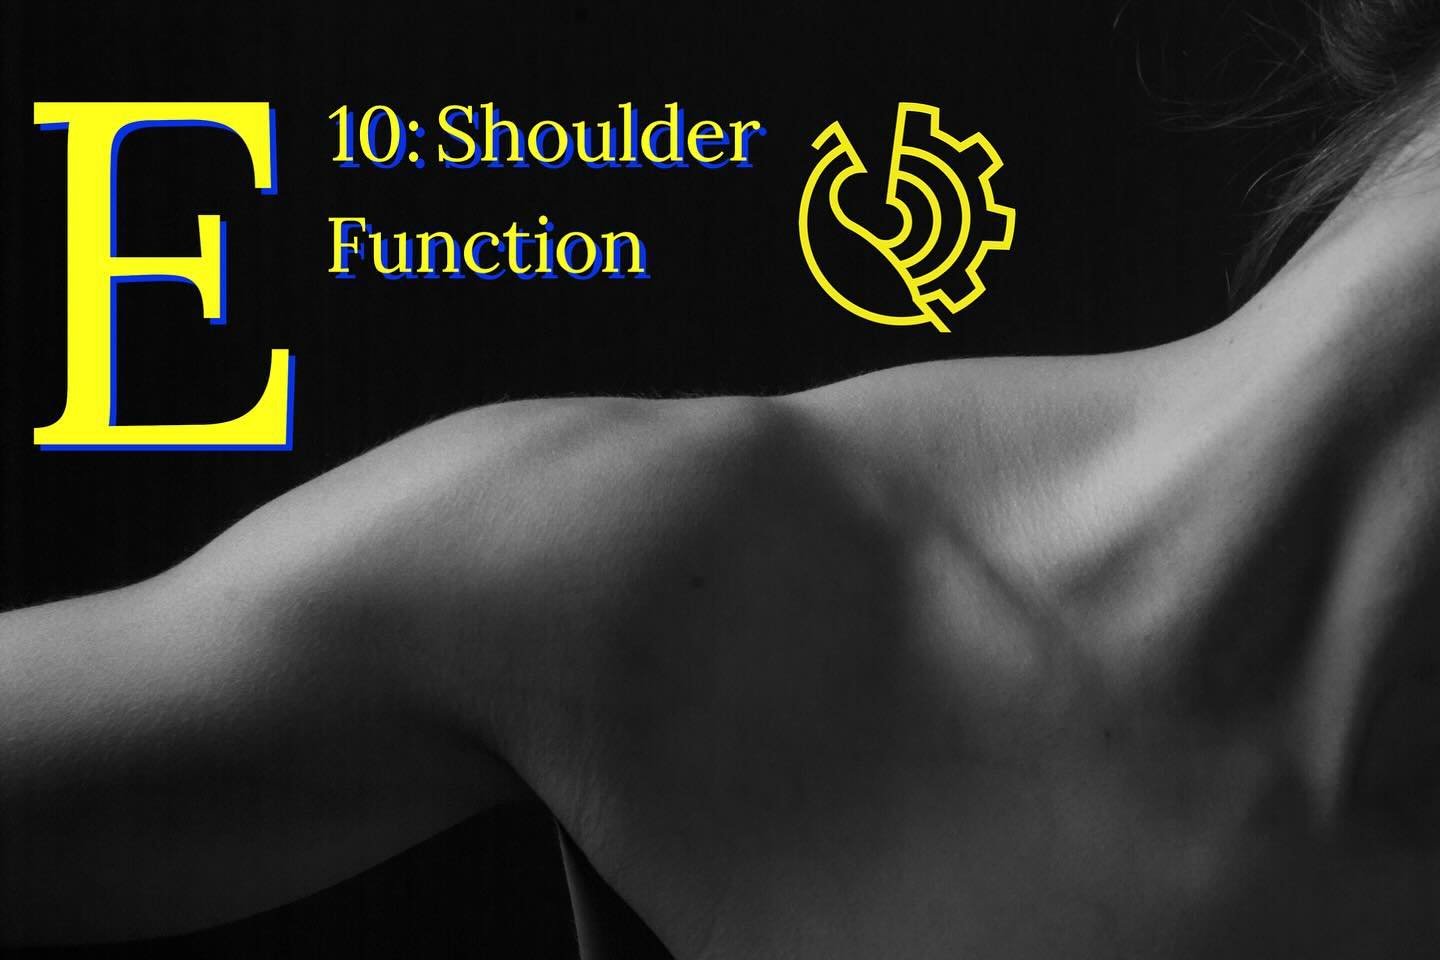 💪 In this weeks episode I go over some very basic anatomy of the shoulder to understand why things can go wrong and how to help. I demonstrate one exercise to improve both strength, mobility and function along with a modification if limitations are 